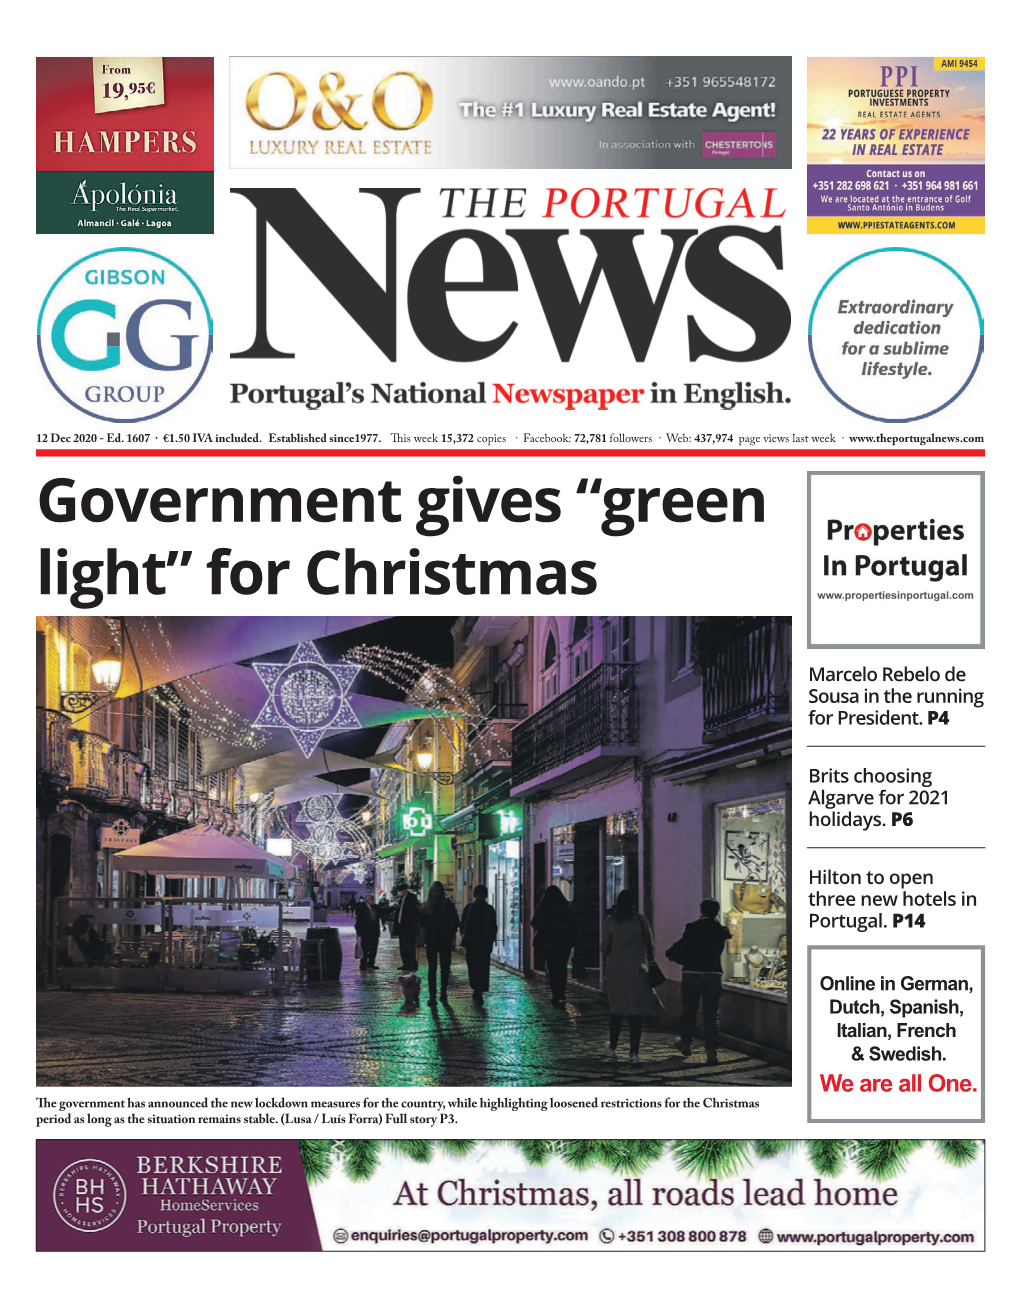 Government Gives “Green Light” for Christmas